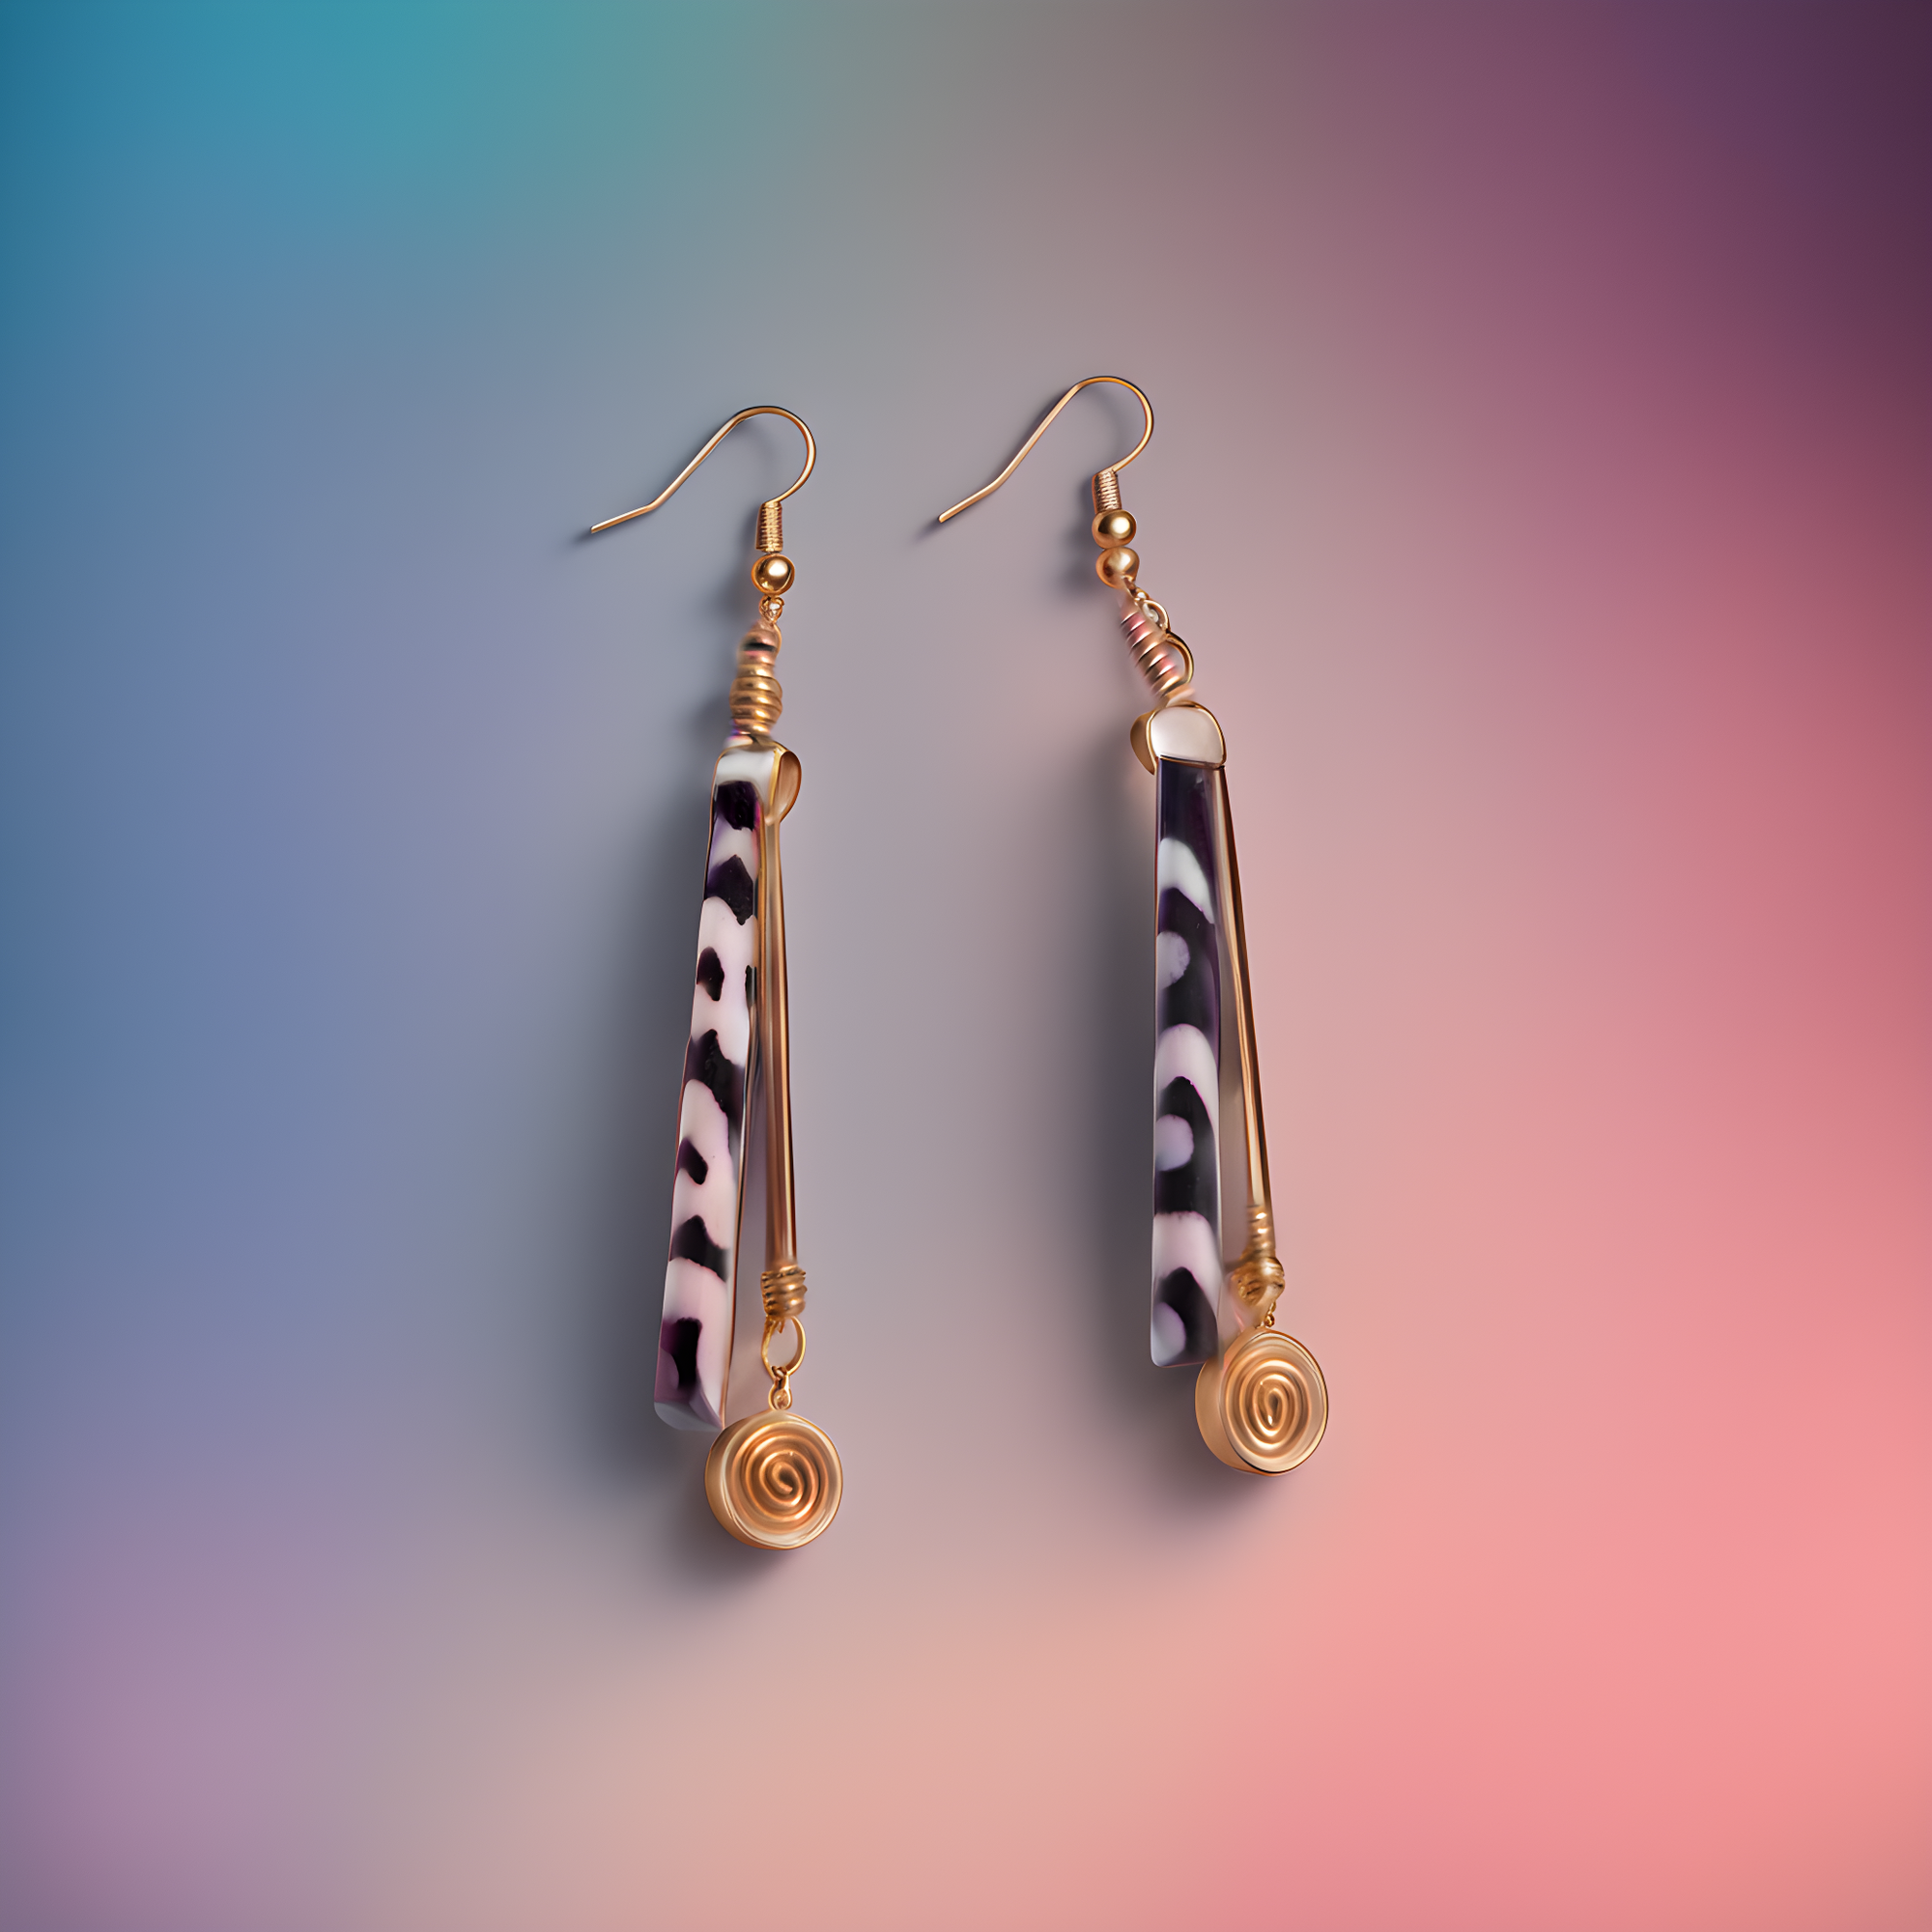 Cowrie Shell Hoop Earrings: A Timeless Fashion Statement